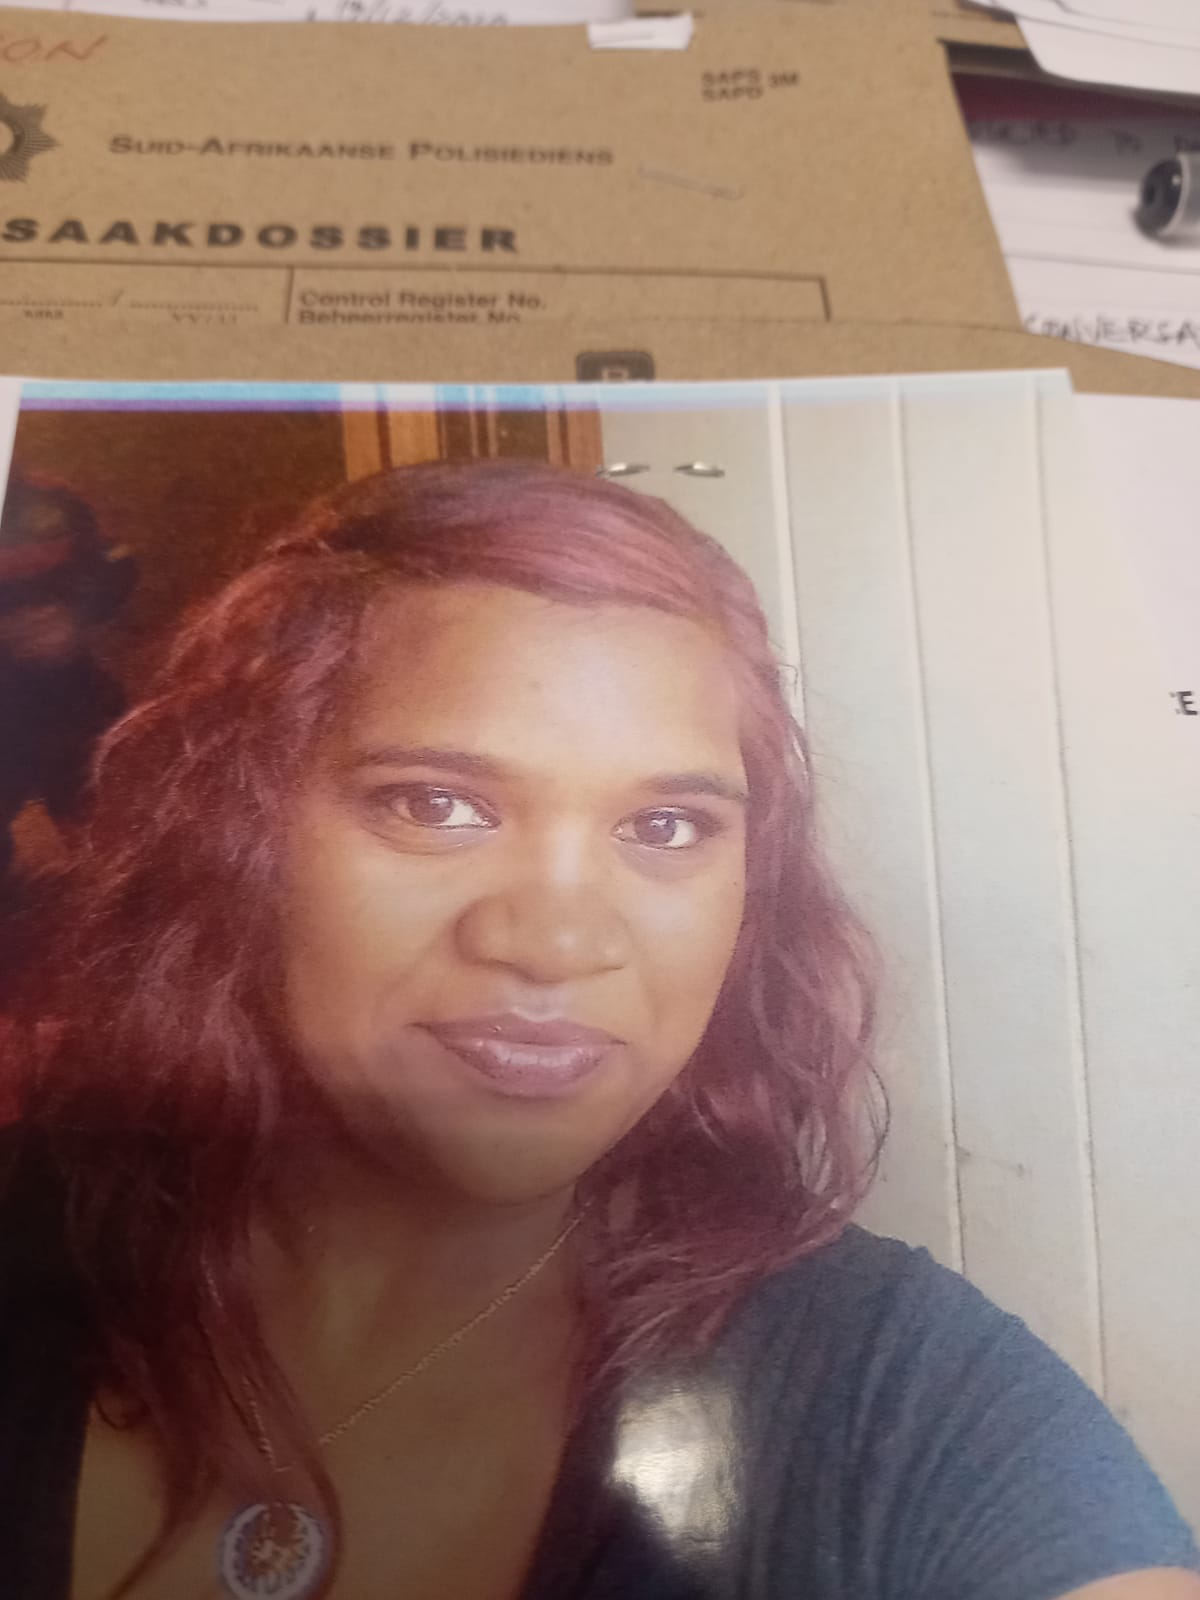 Help Chatsworth police find missing person